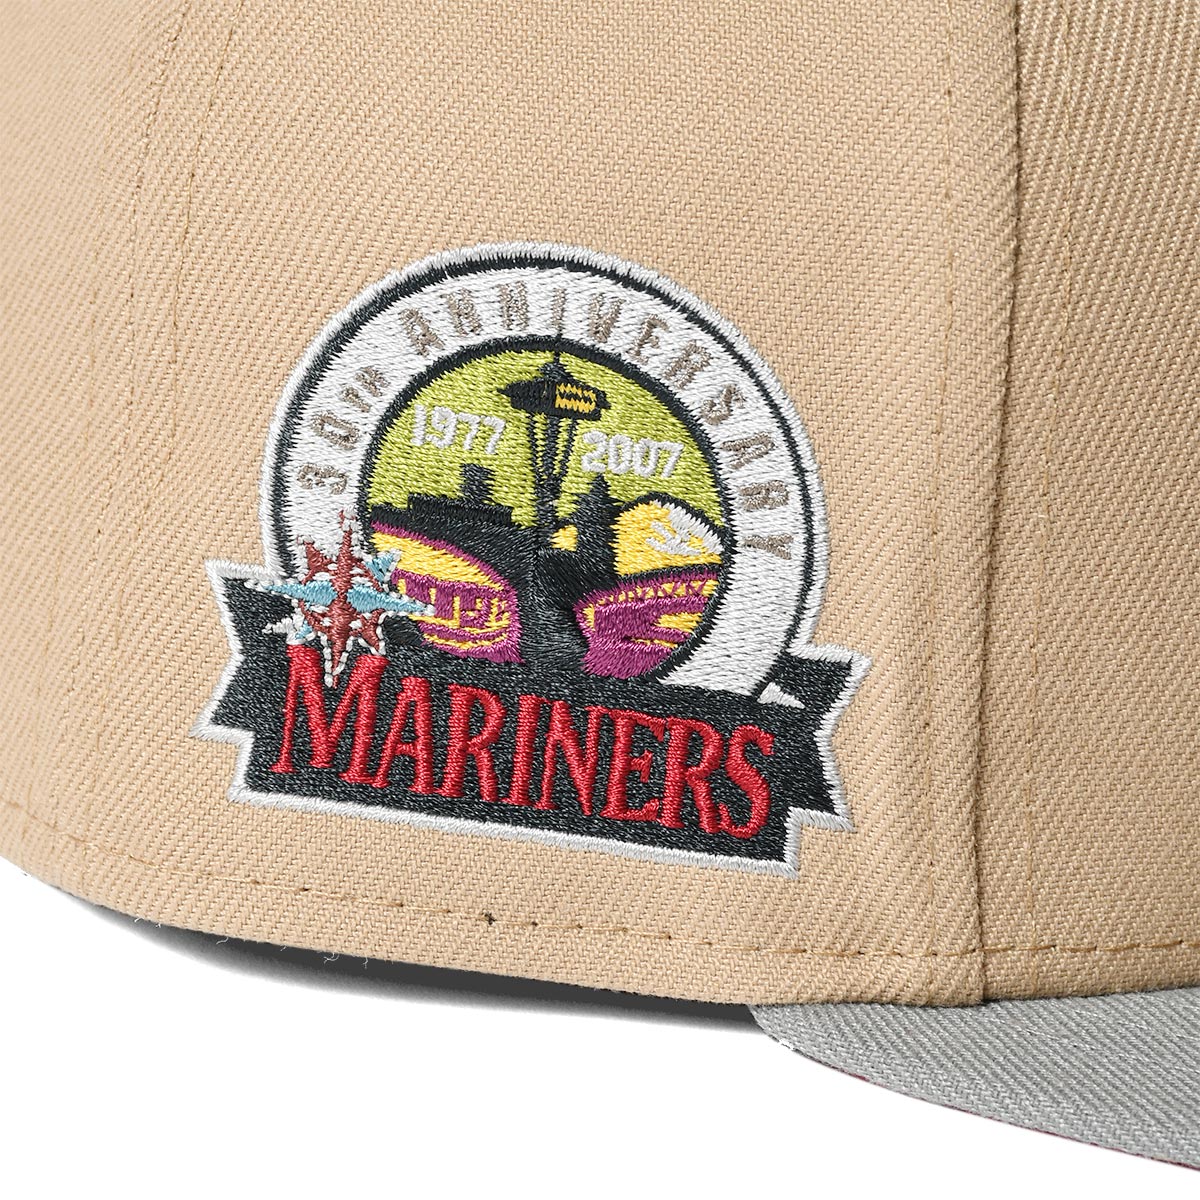 NEW ERA Seattle Mariners - 30th ANV 59FIFTY CAMEL/MISTY【13751116】